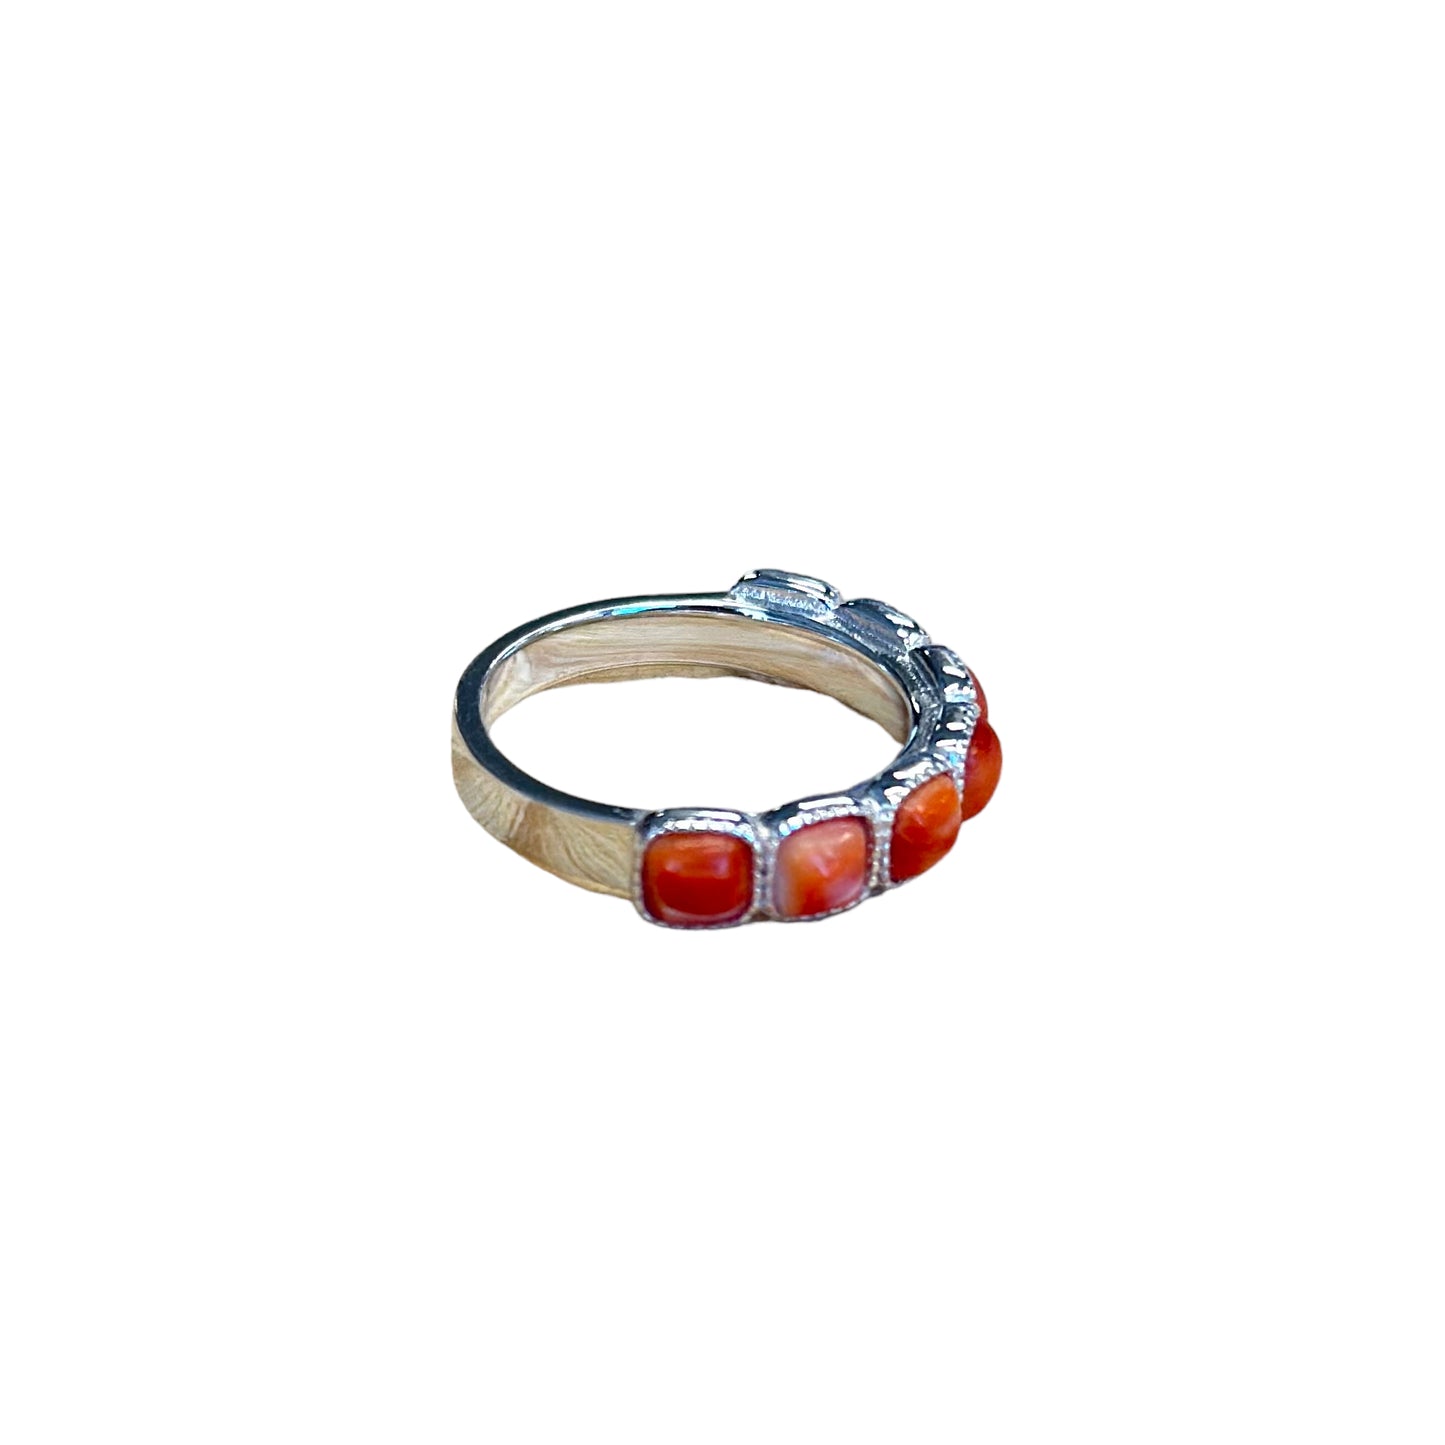 Orange Spiny Oyster 7-Stone Ring Sterling Silver